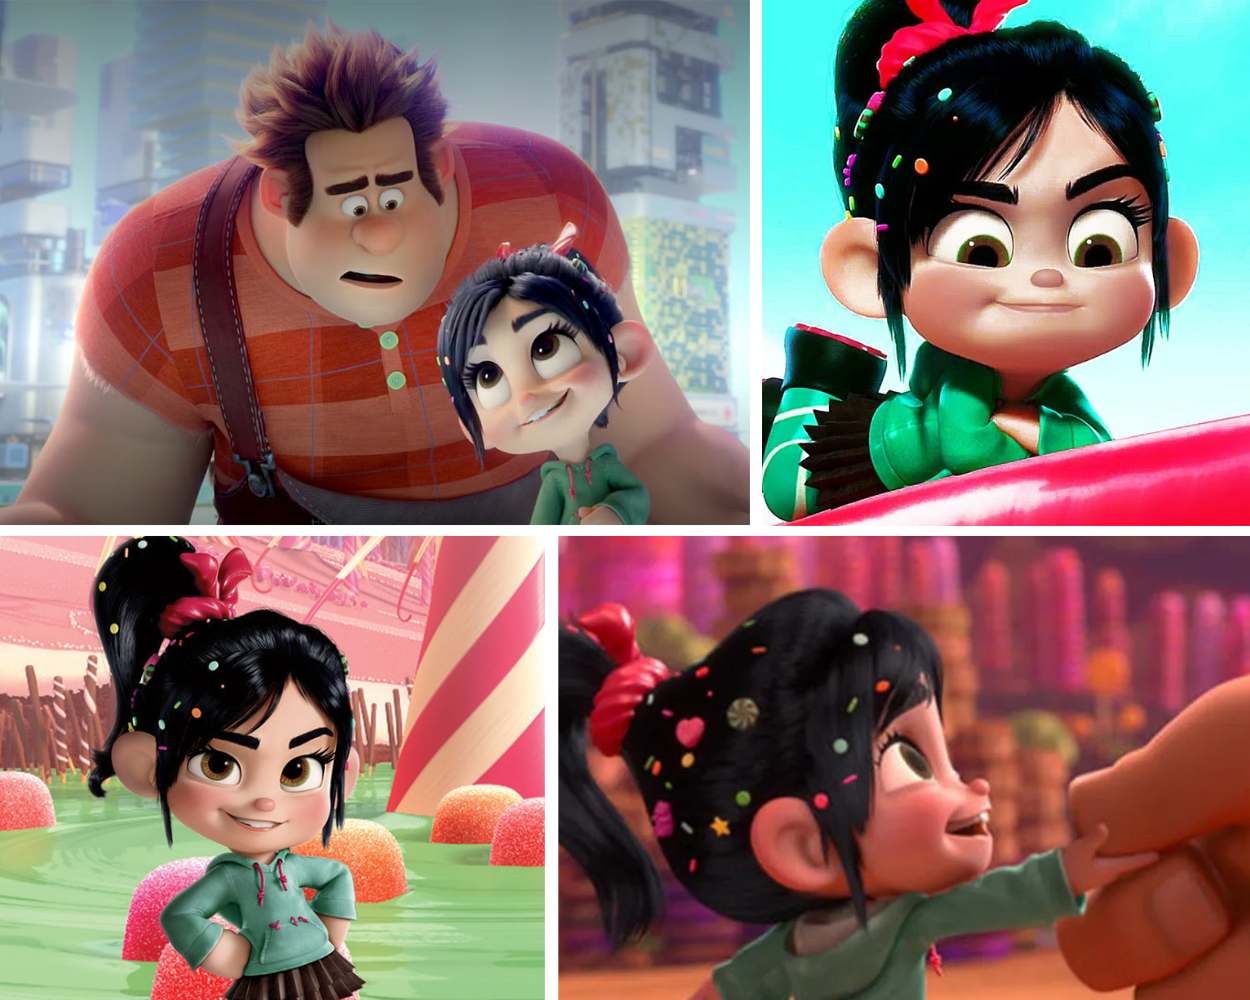 Vanellope - Voice by Sarah Silverman